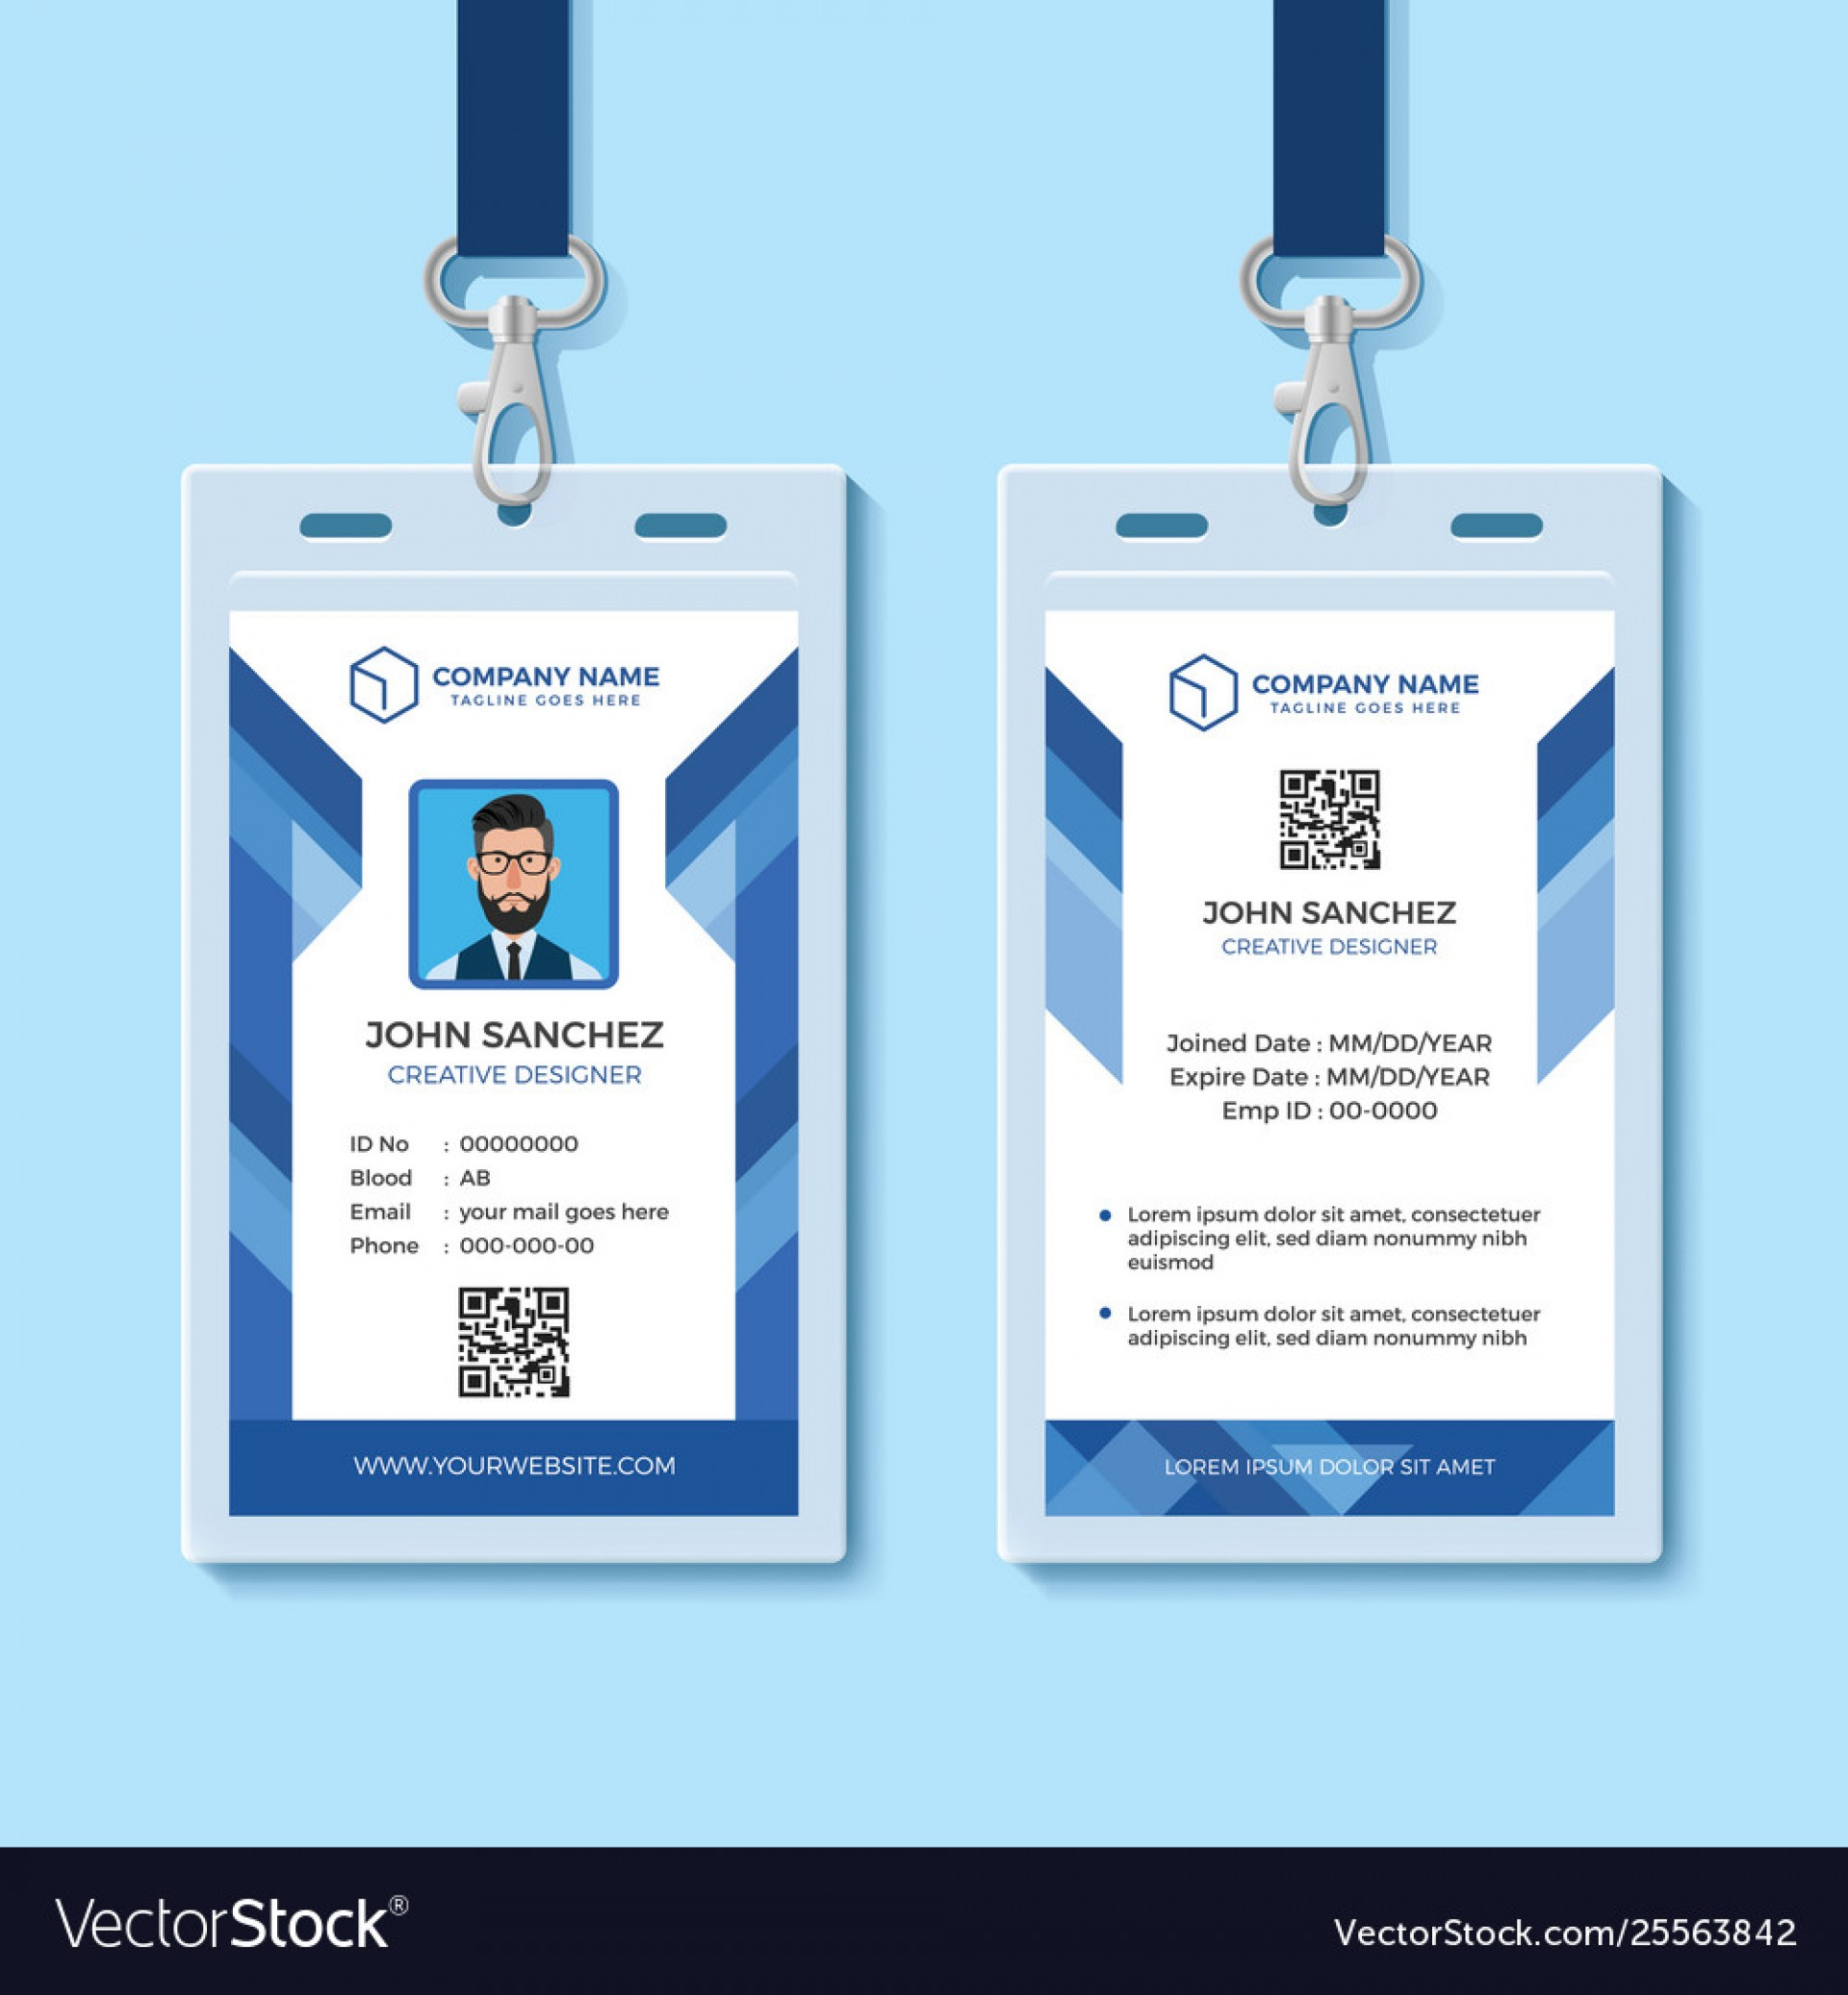 042 Template Ideas Employee Id Card Templates Blue Design Intended For Id Card Template For Microsoft Word